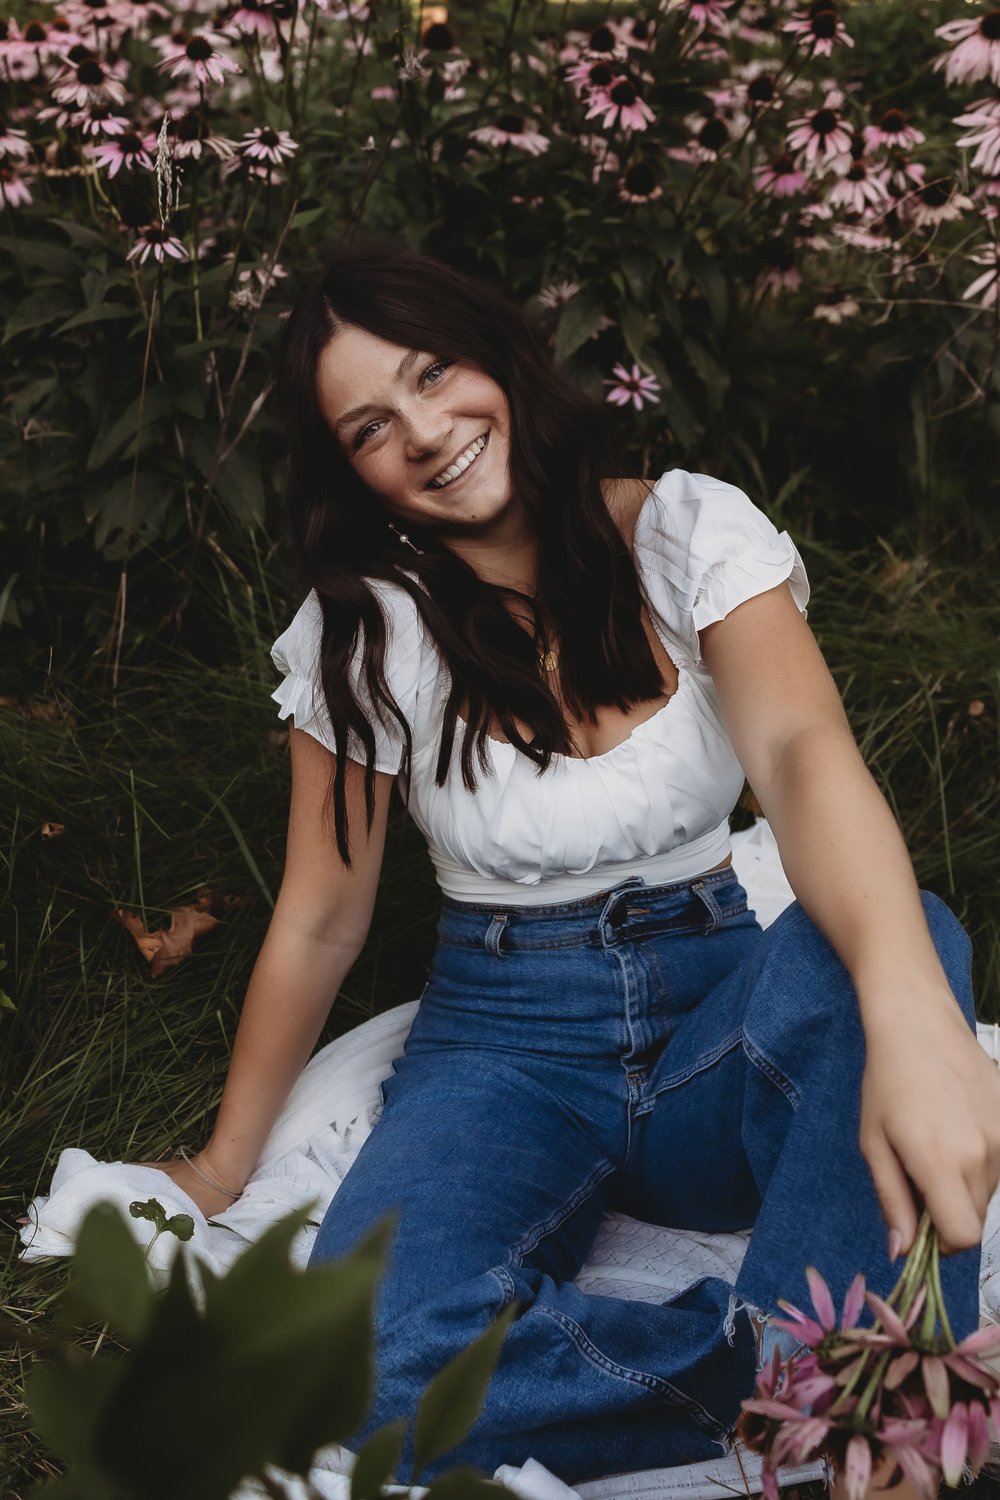  olivia smiles while sitting on a blanket in the grass in front of a bunch of growing flowers 